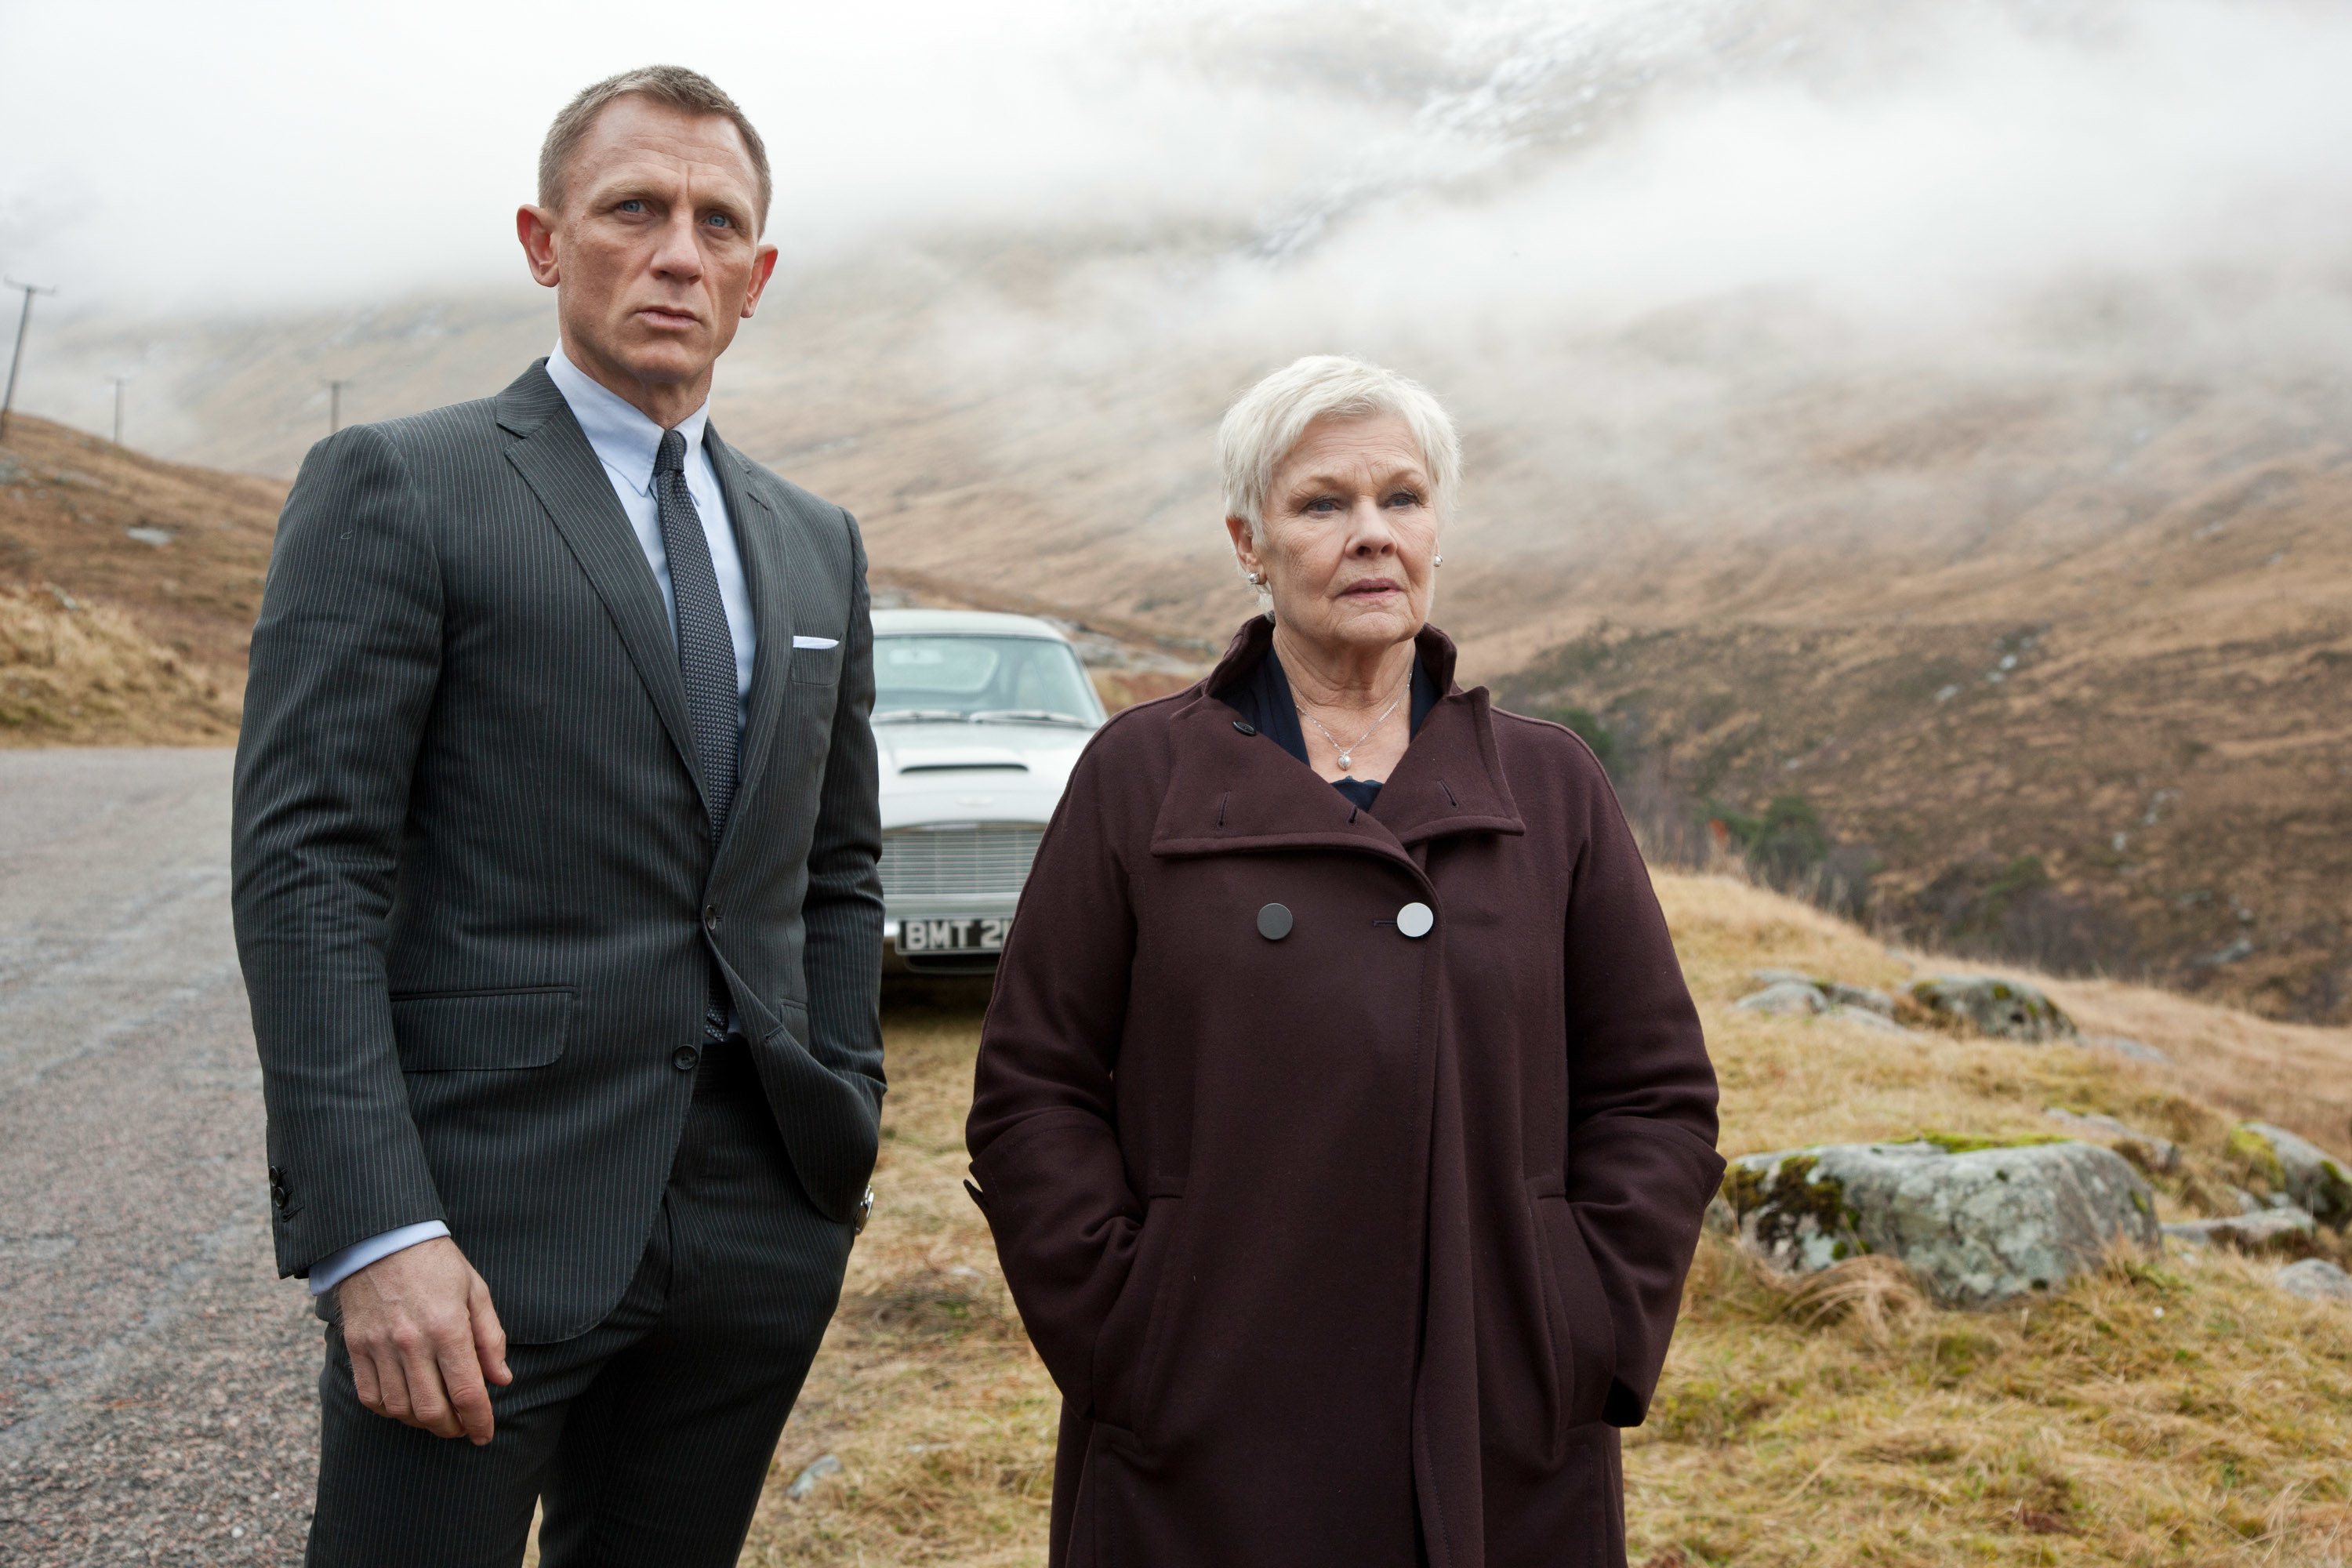 James Bond and Judi Dench&#x27;s M stand in the mountains and look into the distance